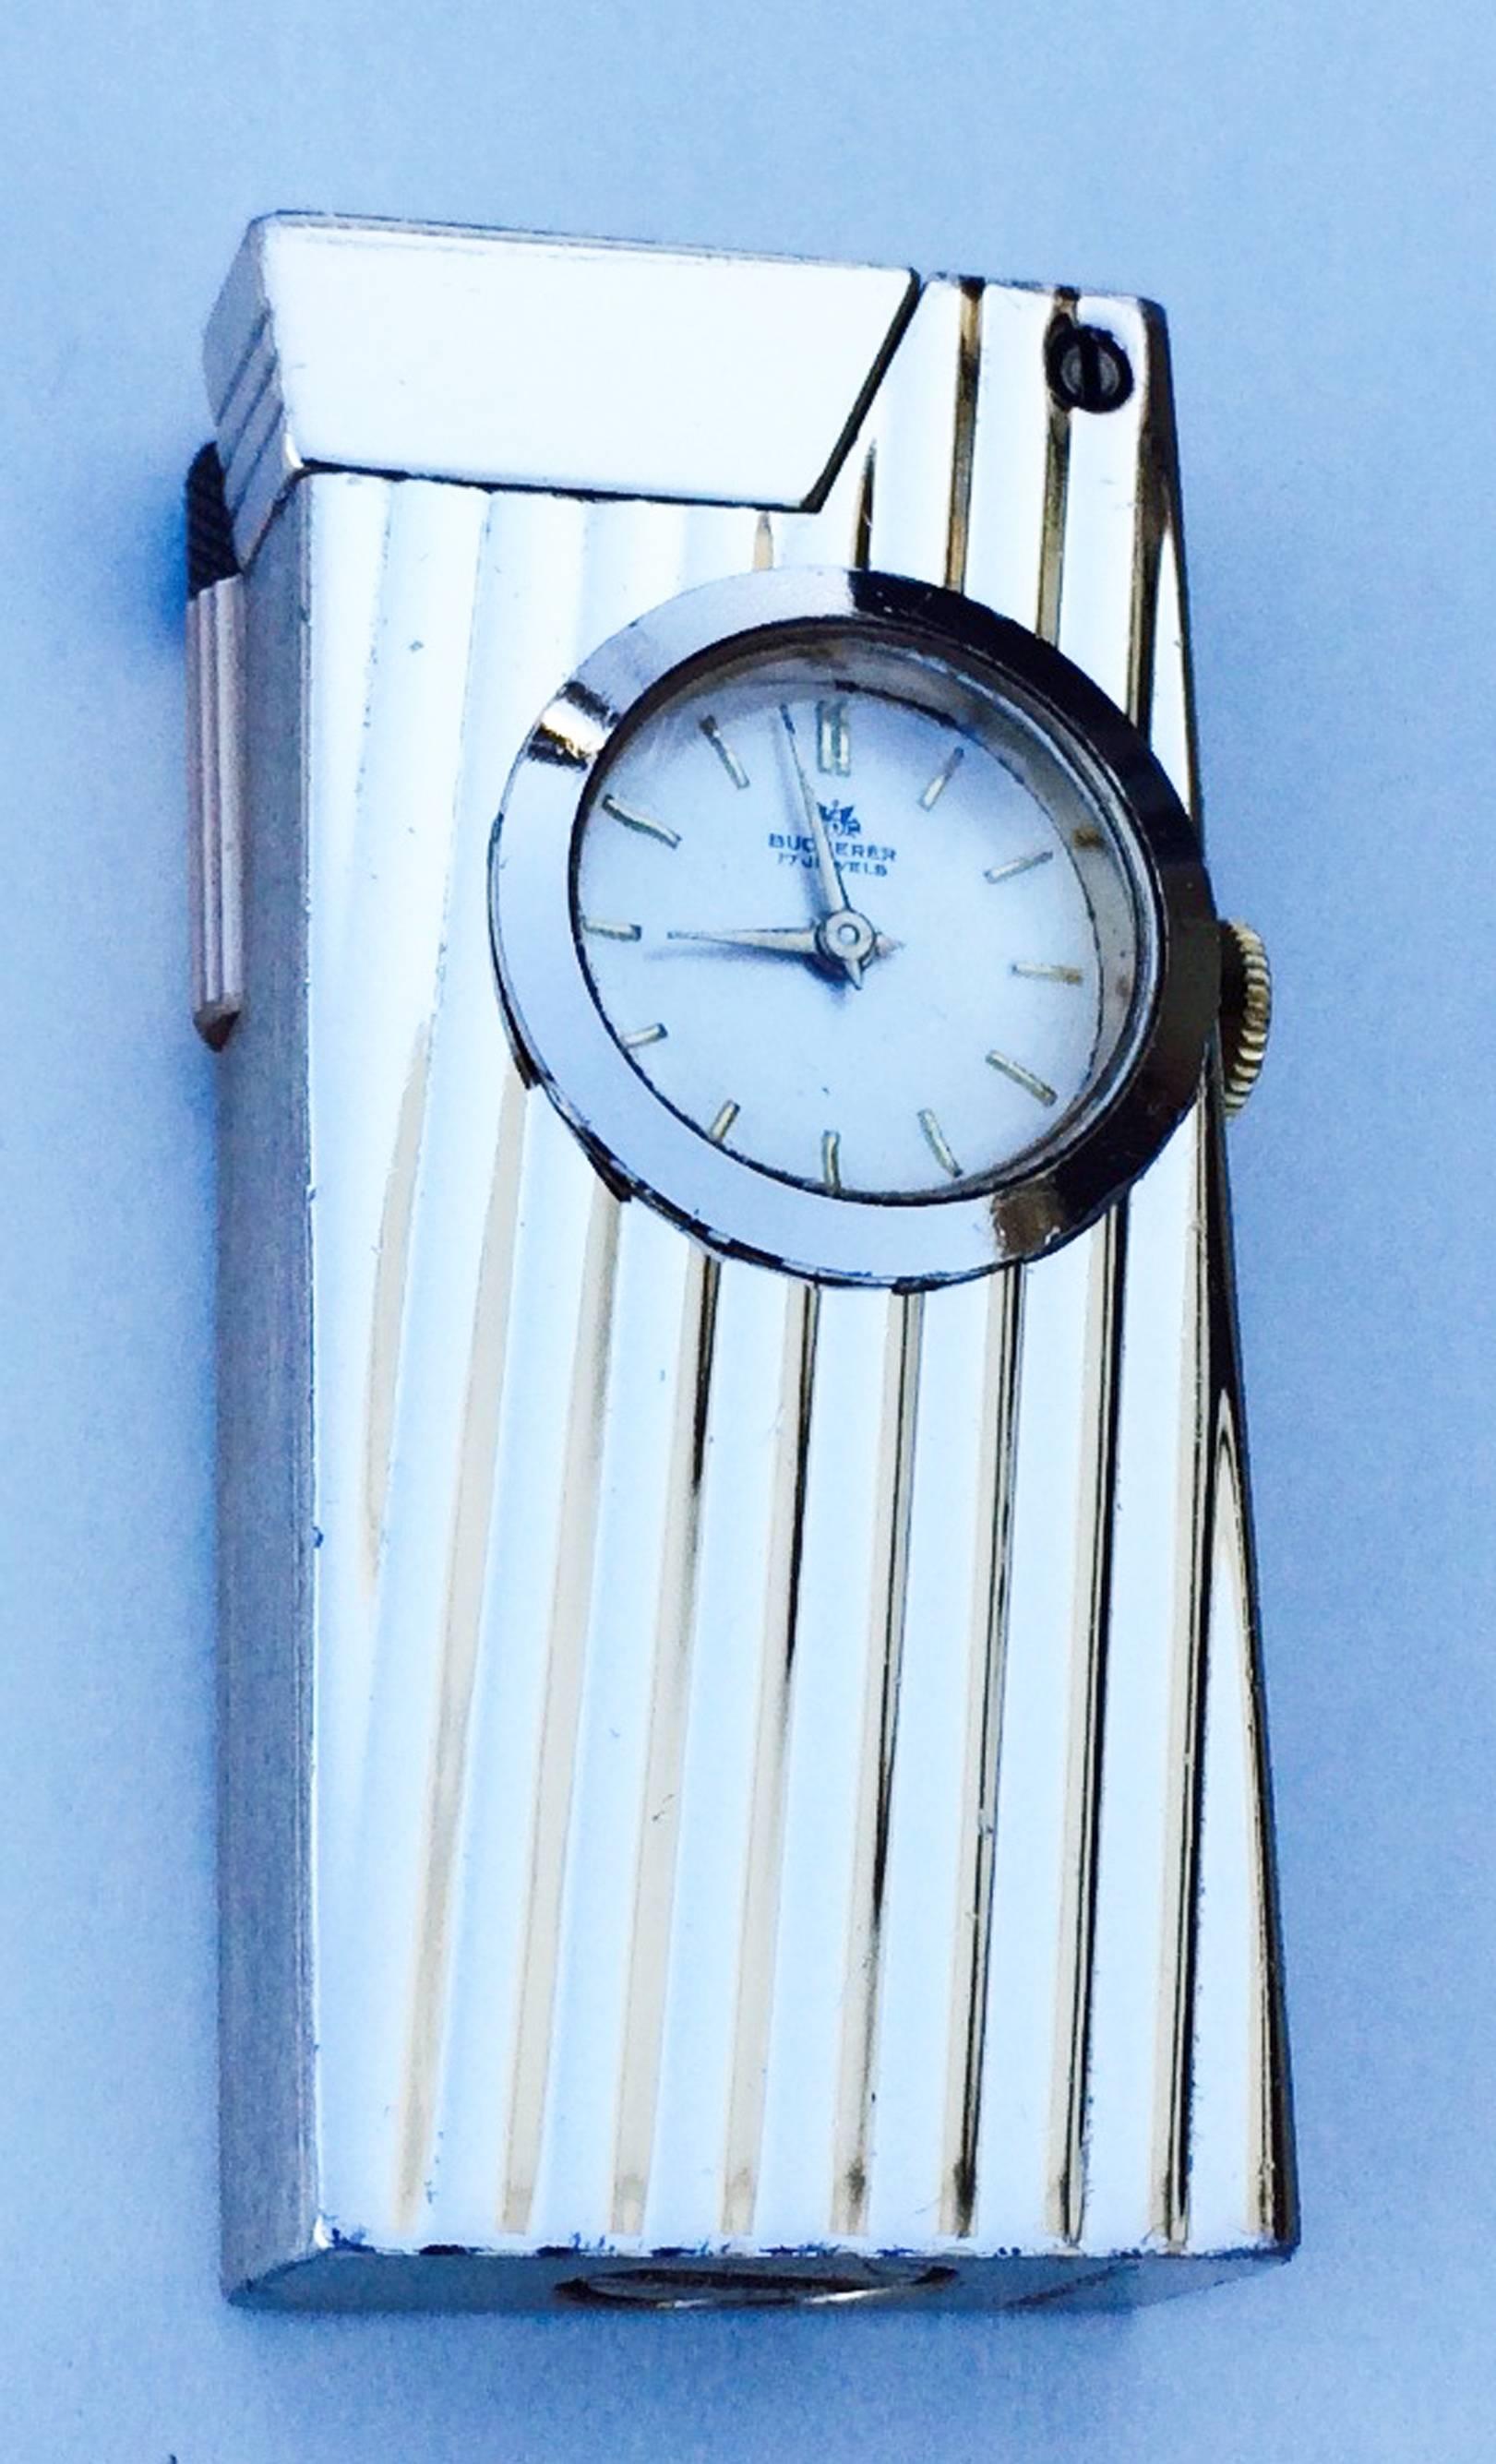 A fine vintage Bucherer lighter watch. Authentic signed gilt item features a Swiss mechanical 17 jewel timepiece and signature box. Both lighter and watch working properly. Excellent.